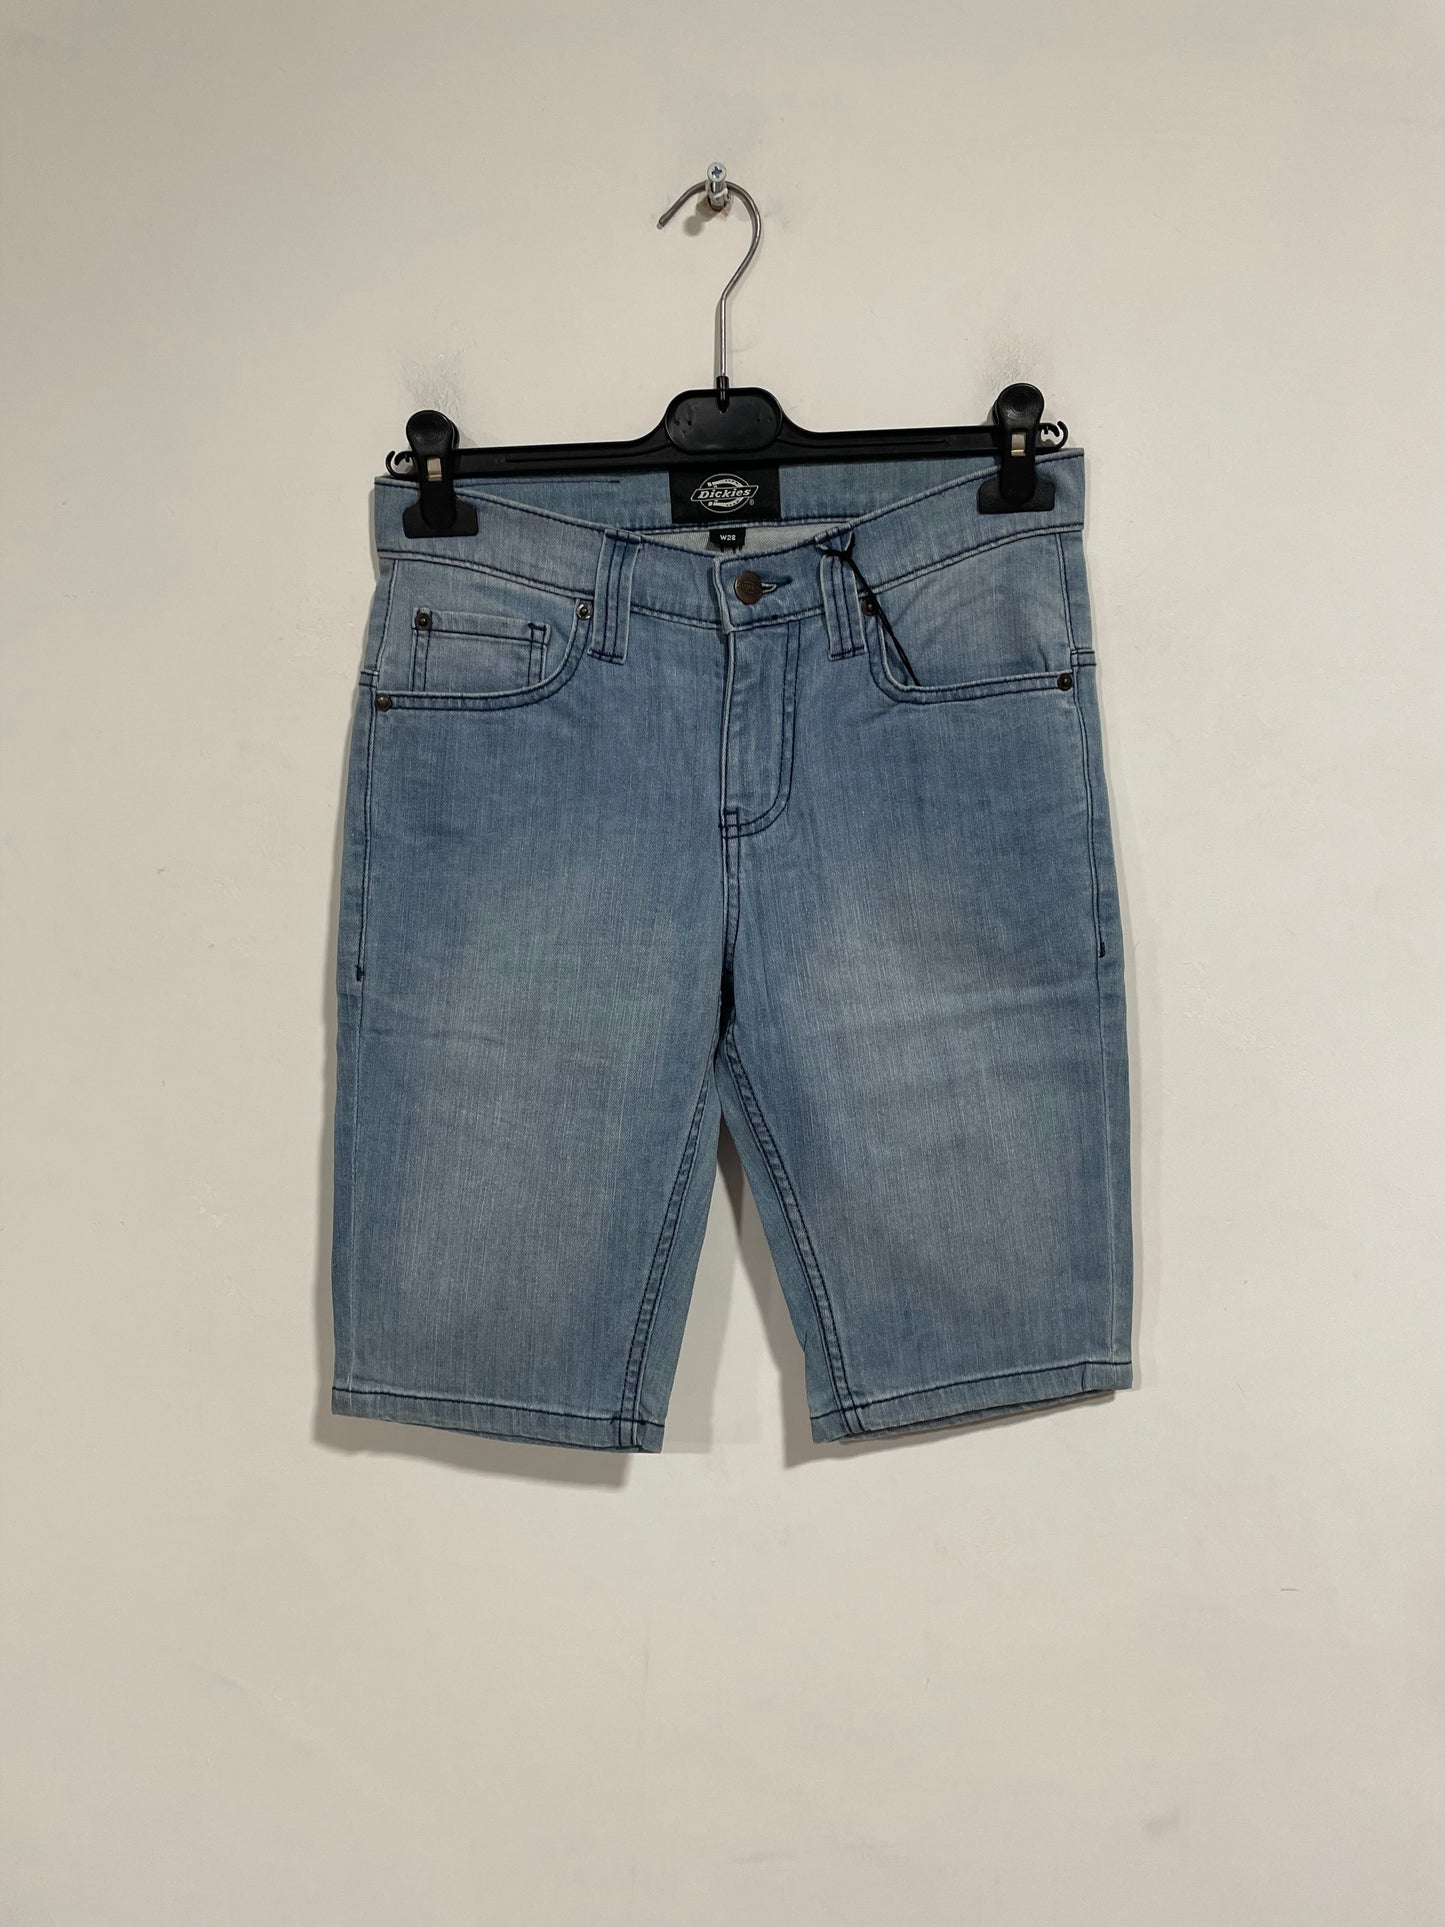 Shorts Dickies in jeans nuovo con cartellino (D718)